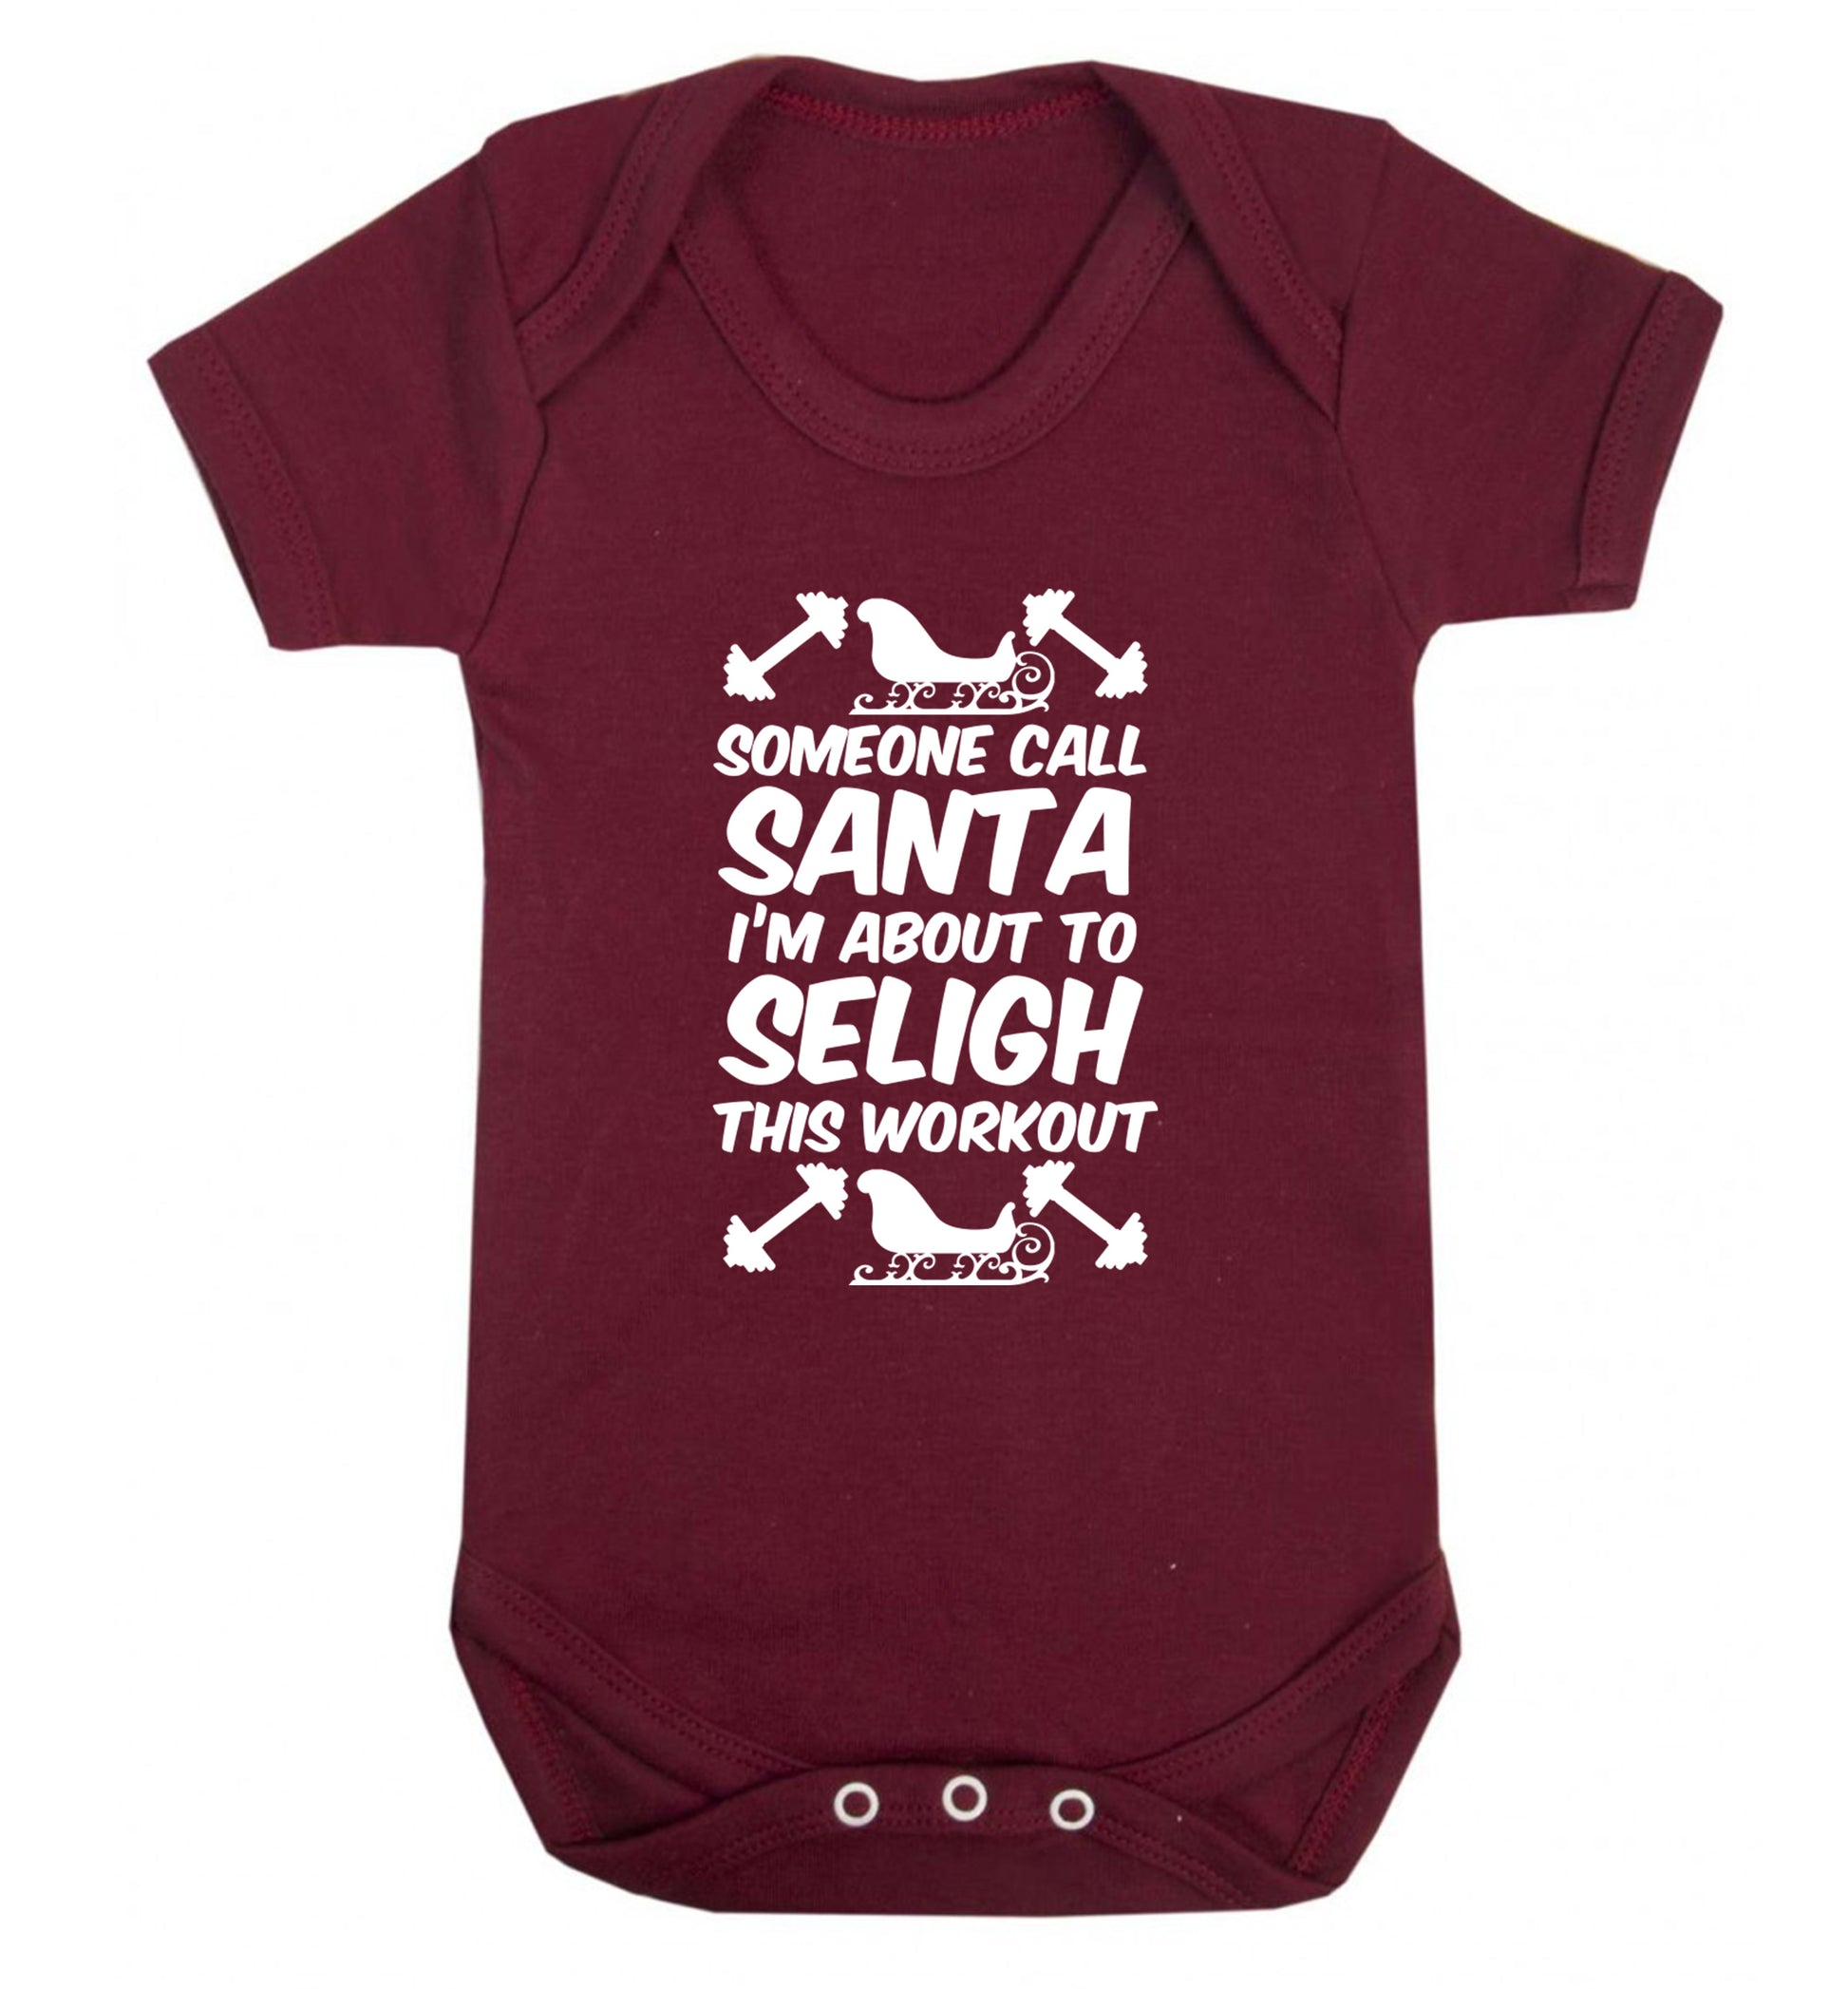 Someone call santa, I'm about to sleigh this workout Baby Vest maroon 18-24 months